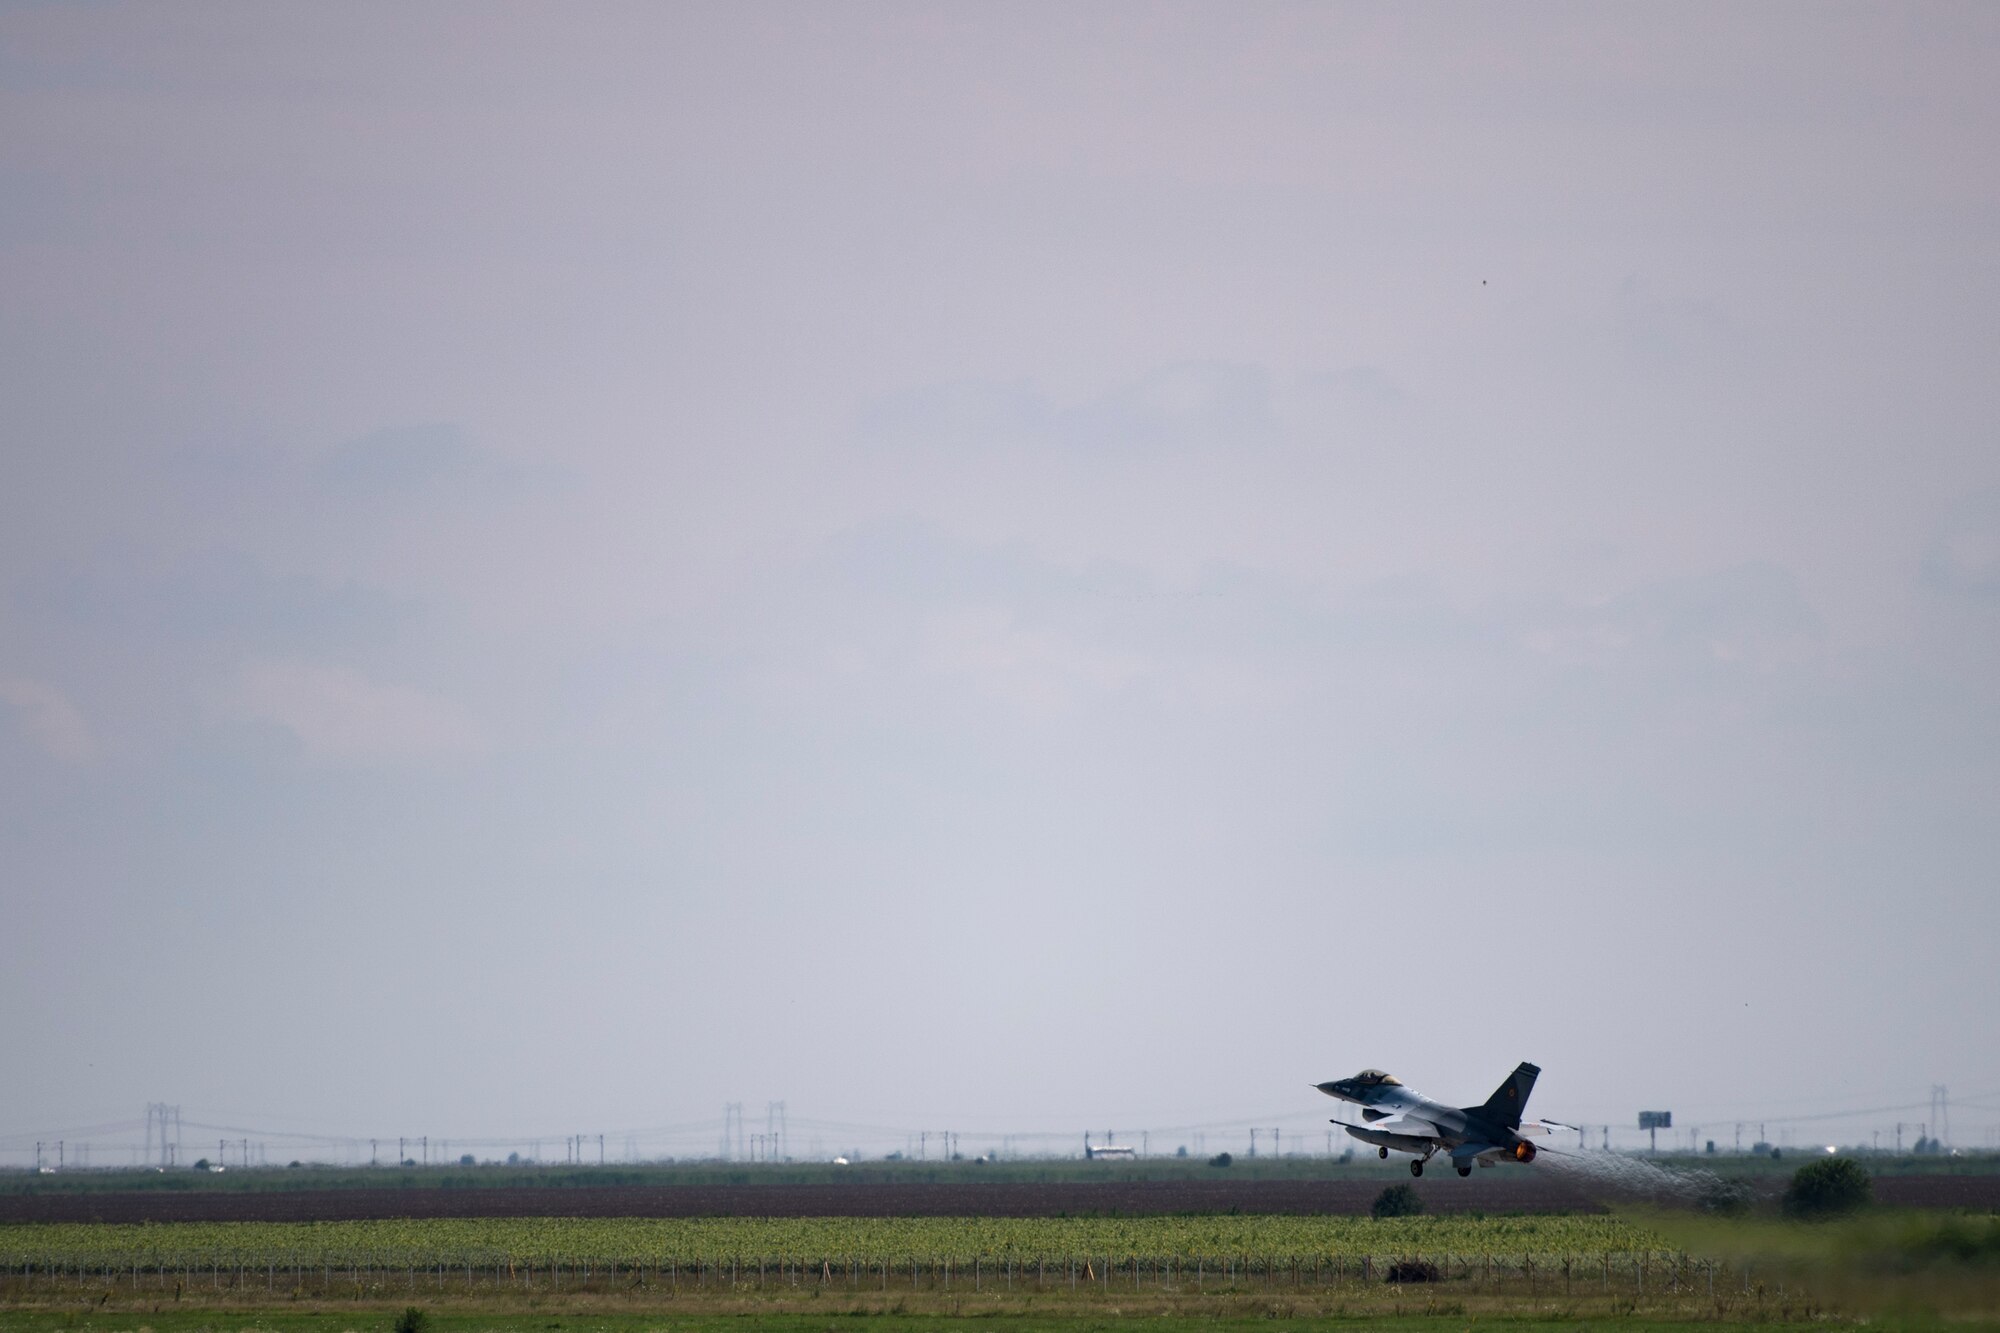 A Romanian air force pilot takes off in an F-16 Fighting Falcon on Borcea Air Base, Romania, July 26, 2018. The Romanian air force obtained the F-16s in 2016. U.S. Air Force maintenance personnel visited Borcea to provide visual aid and share aircraft maintenance processes with the Romanians as part of a three-week engagement. (U.S. Air Force photo by Senior Airman Devin Boyer)